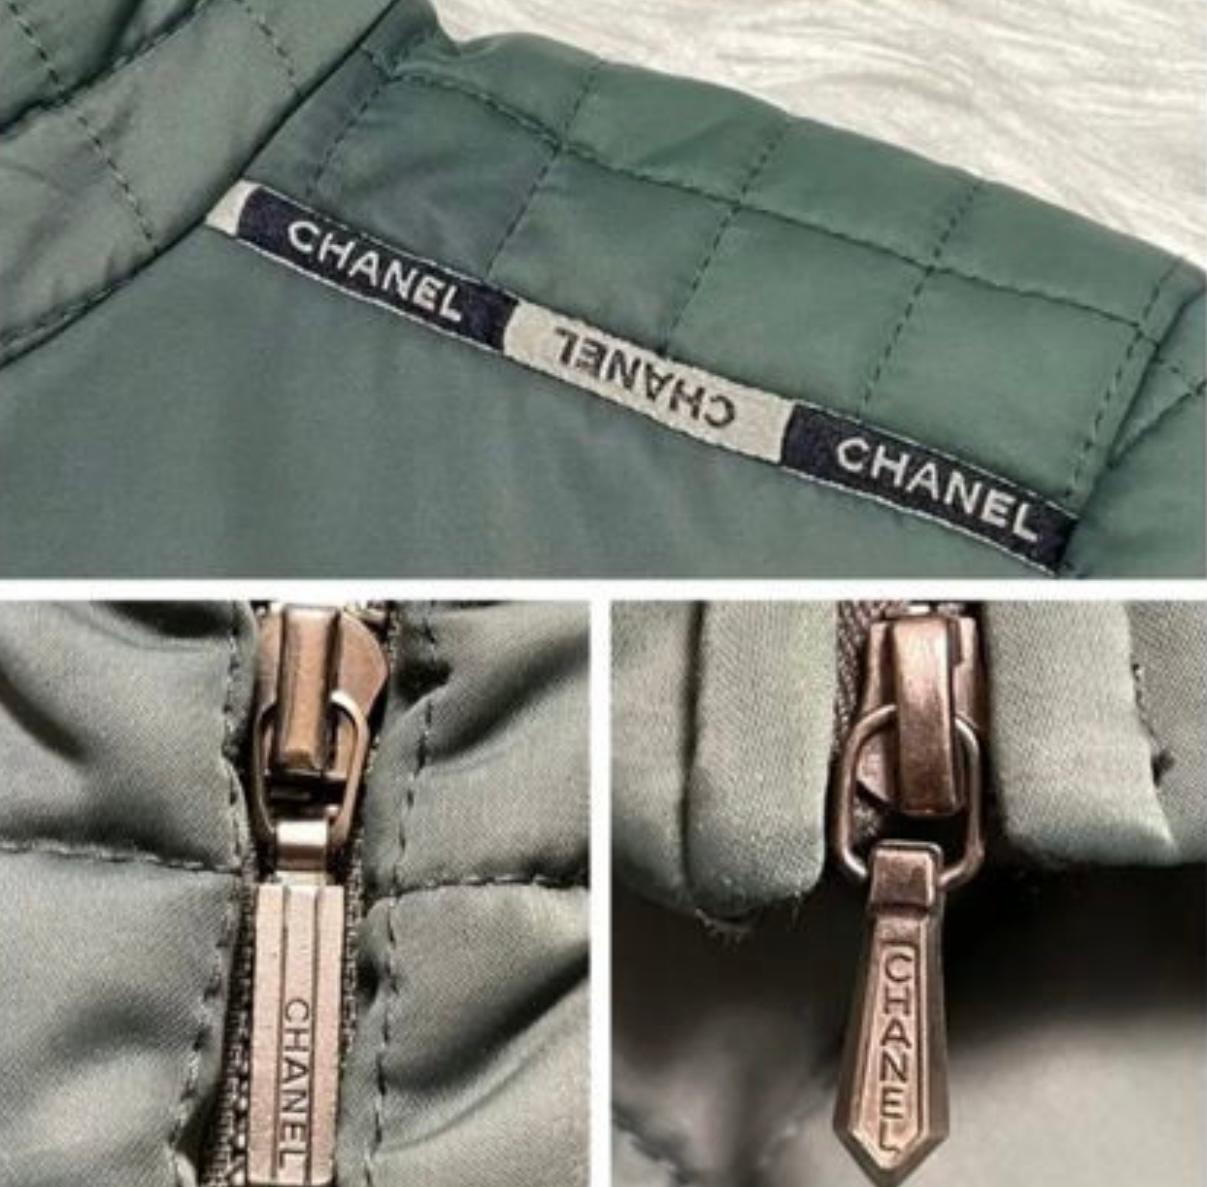 Rare Chanel emerald green quilted jacket with 'Chanel' logo ribbon at shoulders.
- front fastening with logo zipper
Size mark 34 FR. Condition is pristine.